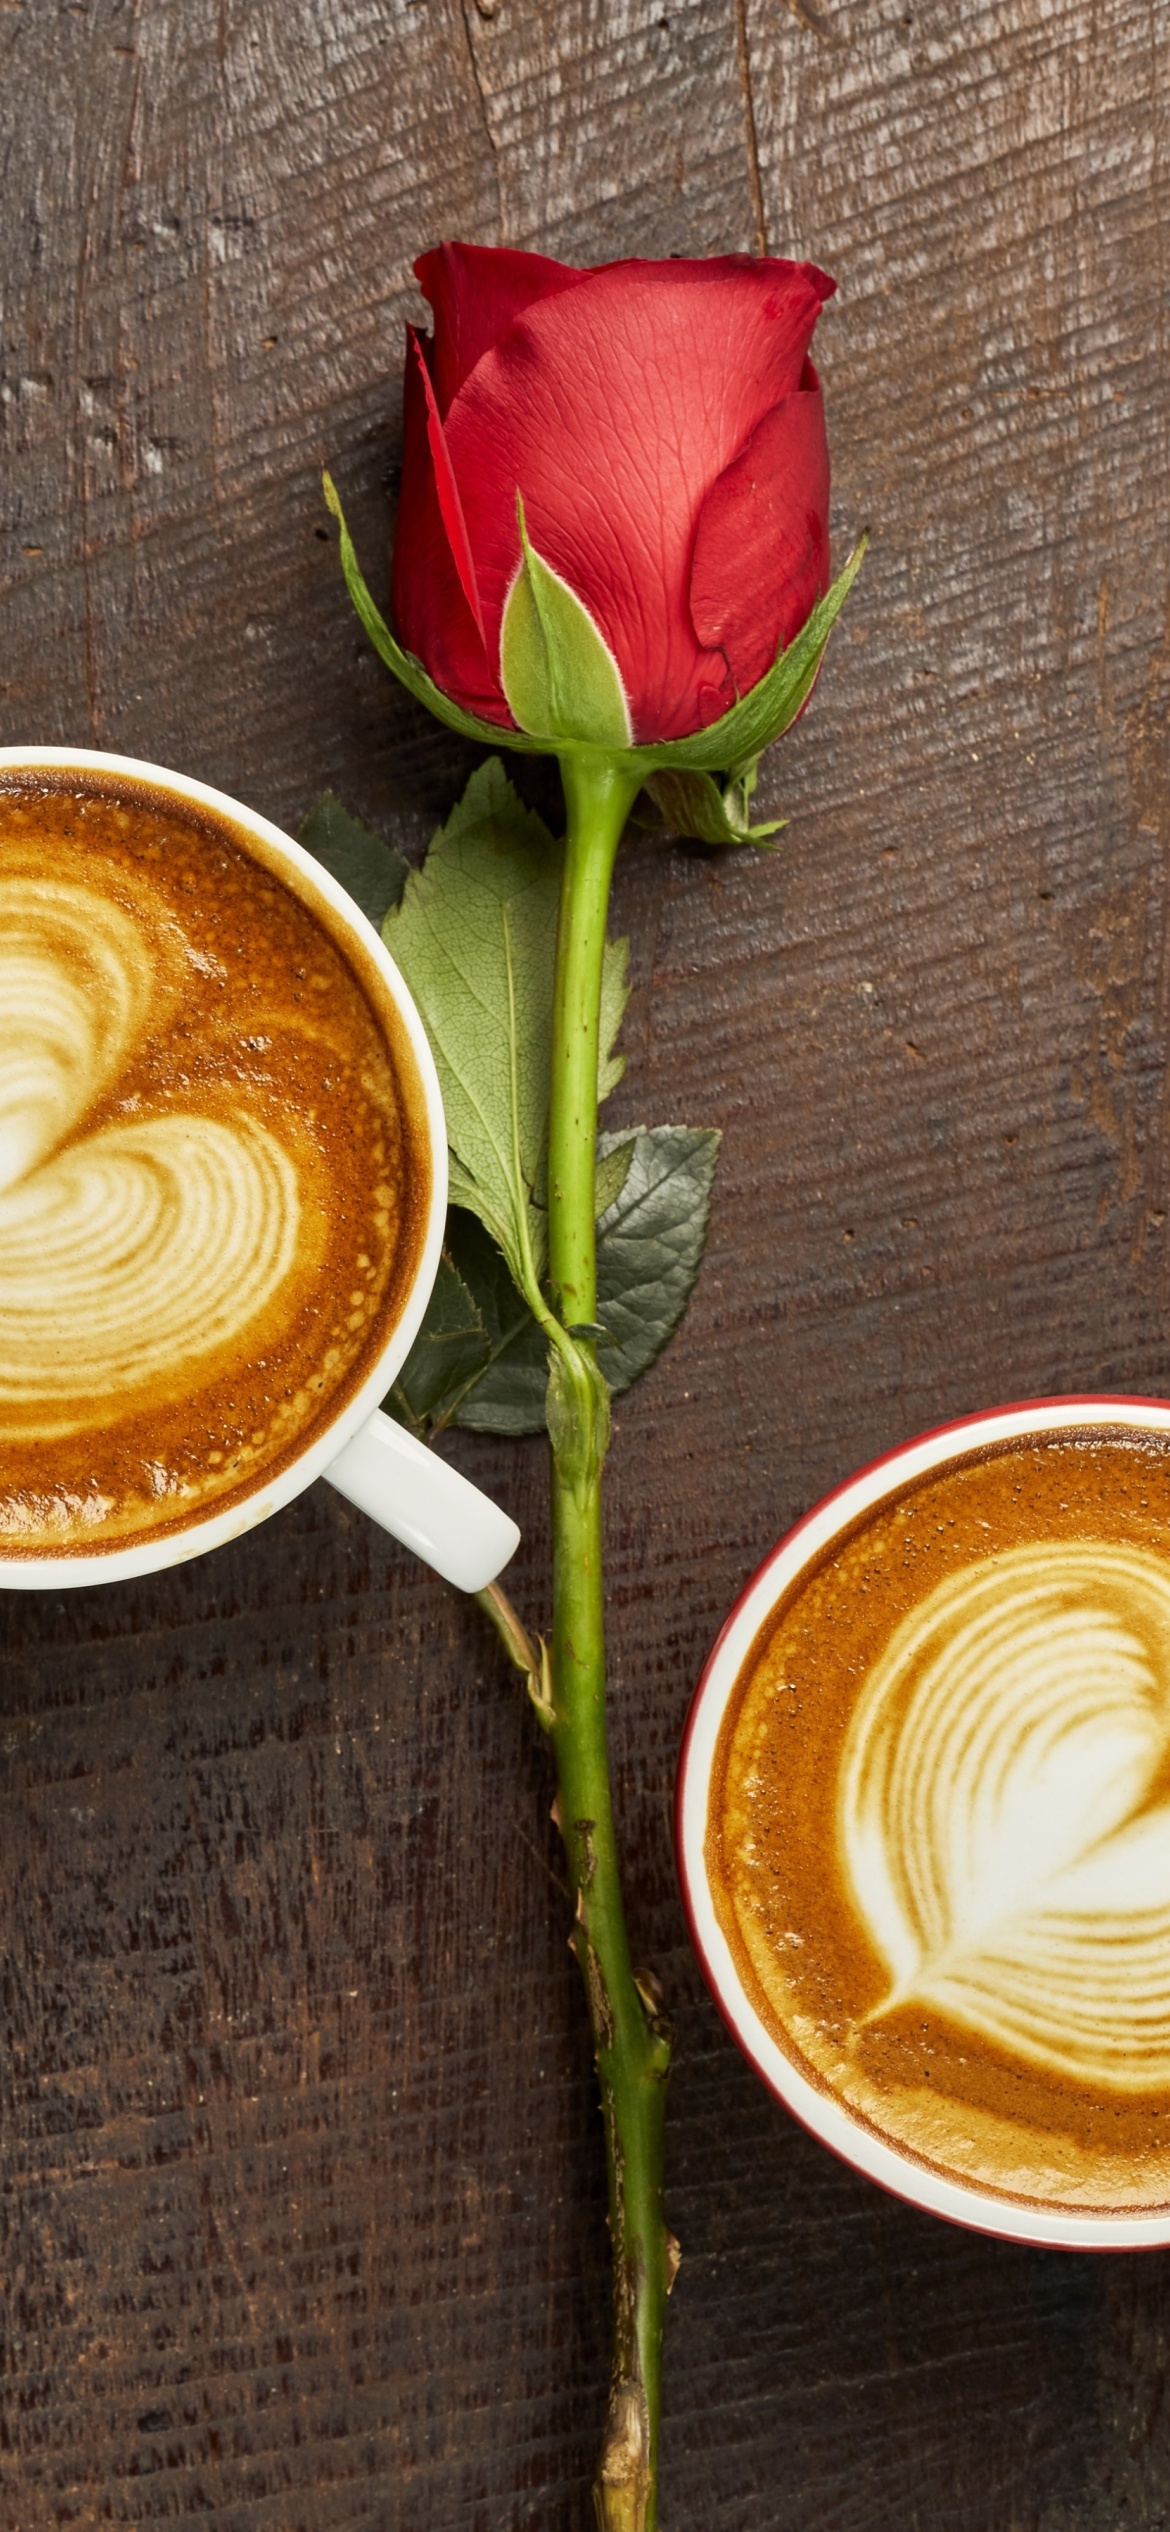 Romantic Coffee and Rose wallpaper 1170x2532